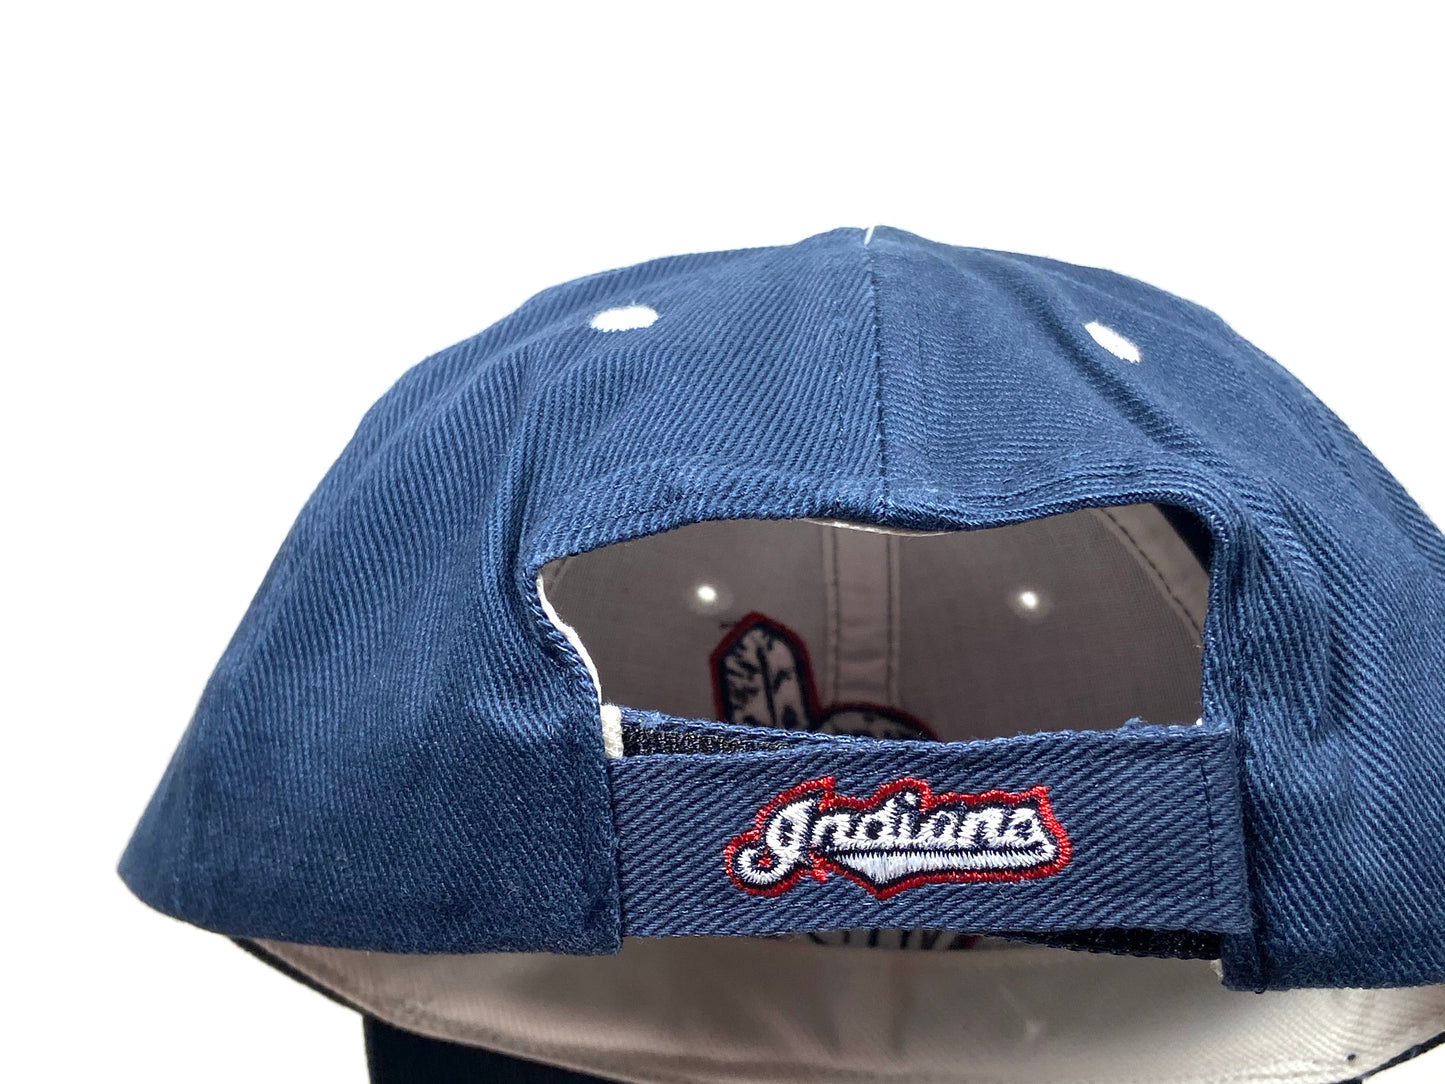 Cleveland Indians Vintage MLB Navy w/White Wahoo Cap by Twins Enterprise